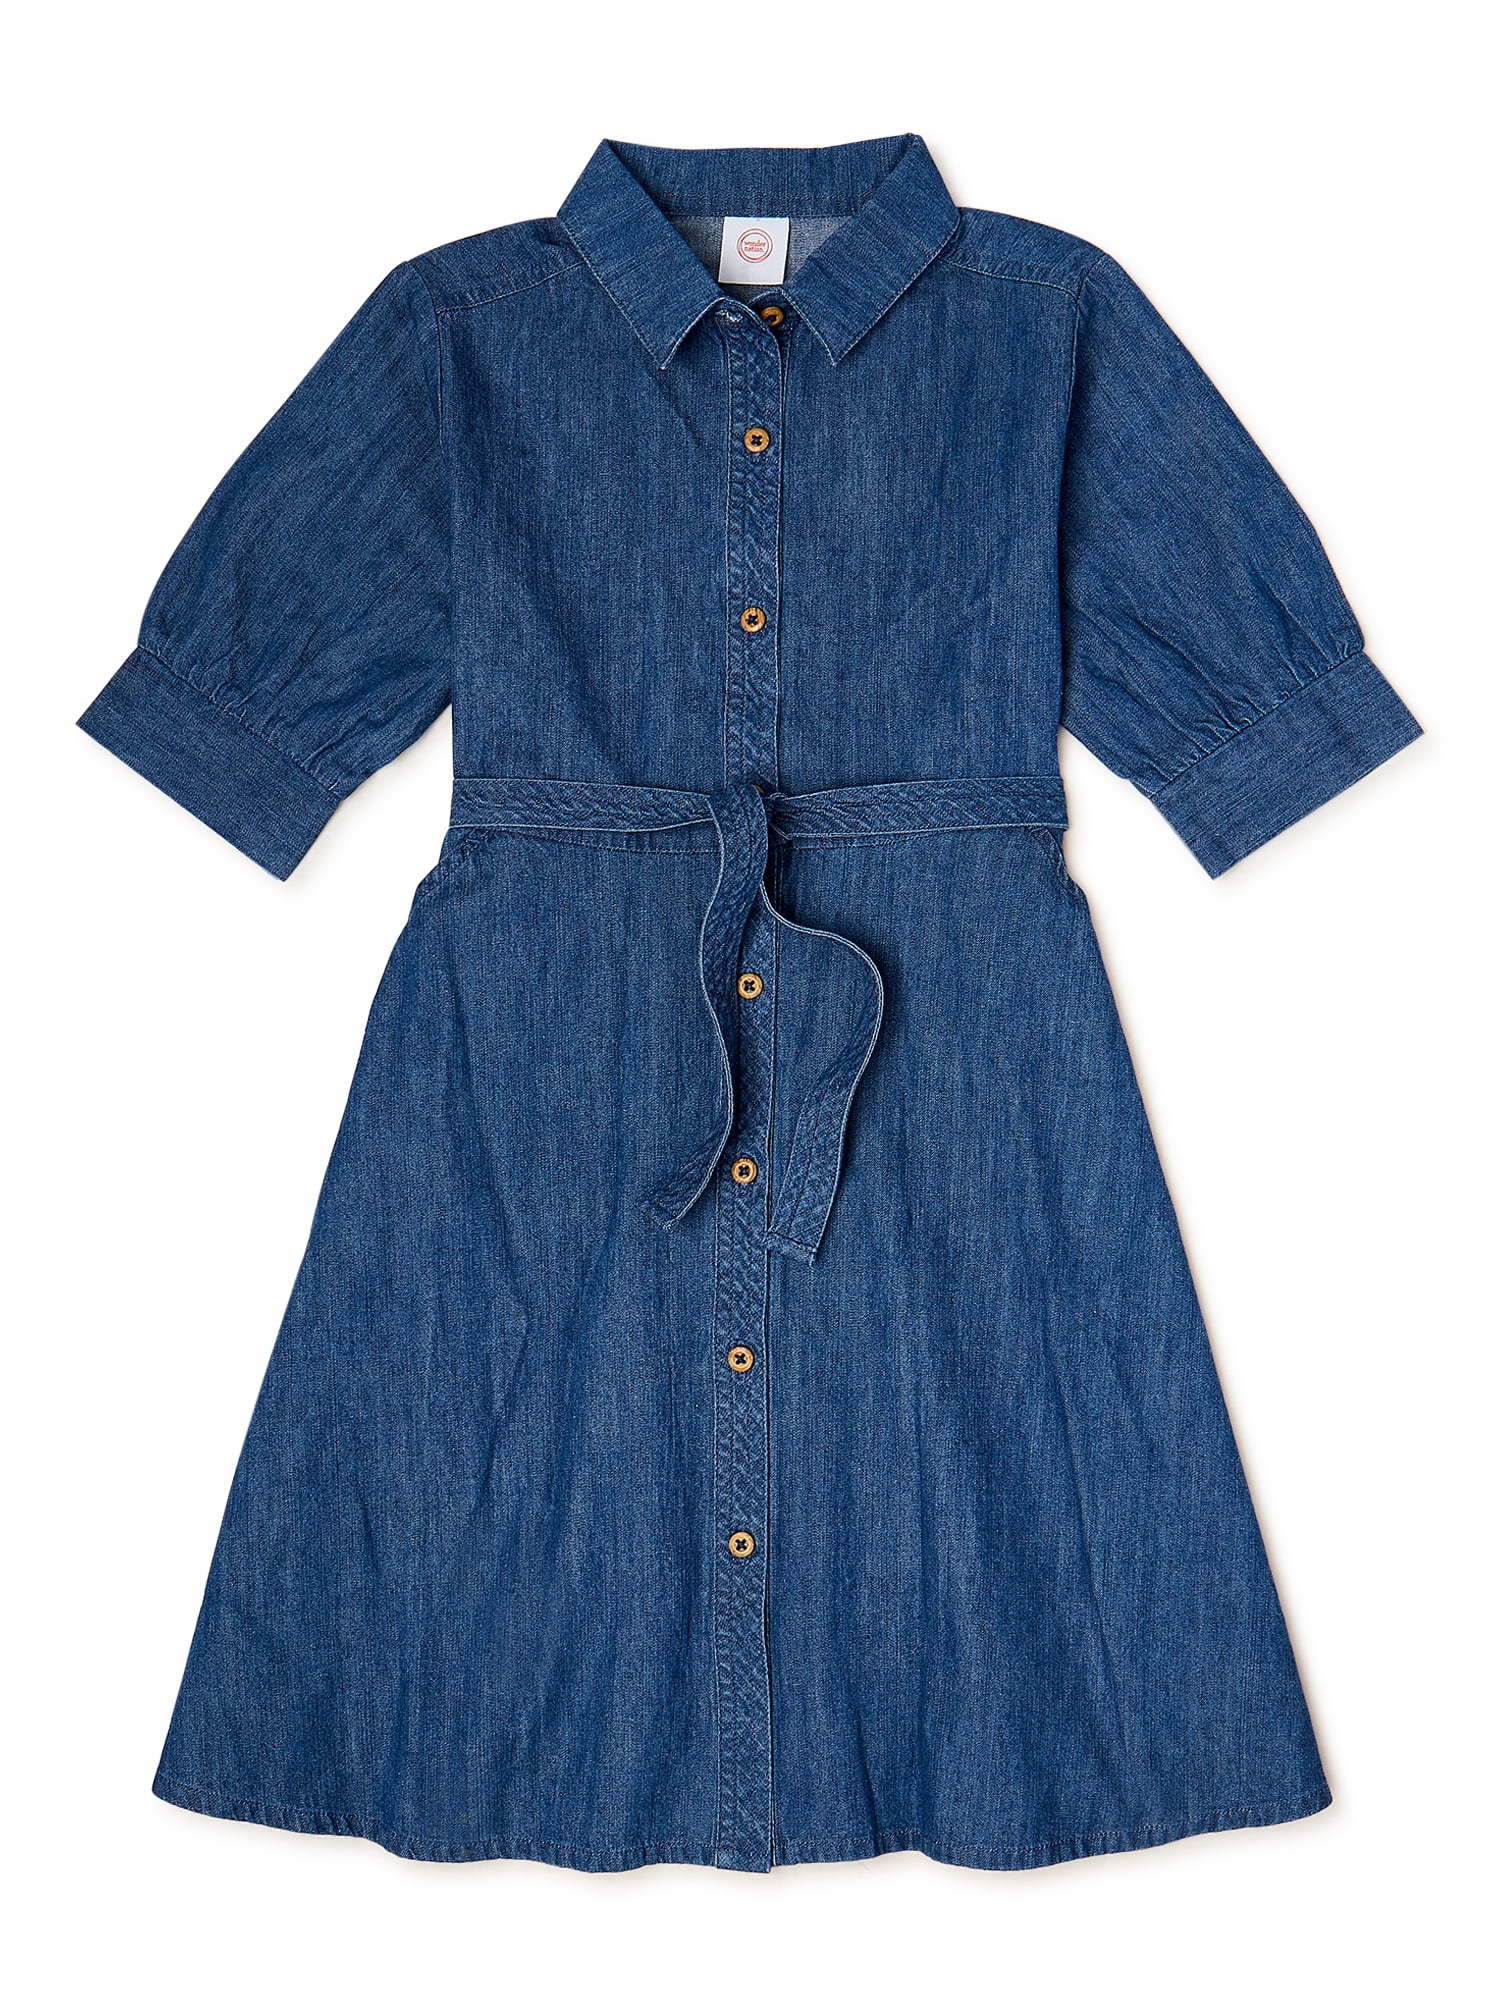 Wonder Nation Girls Collared Shirt Dress with Elbow Sleeves, Sizes 4-18 & Plus